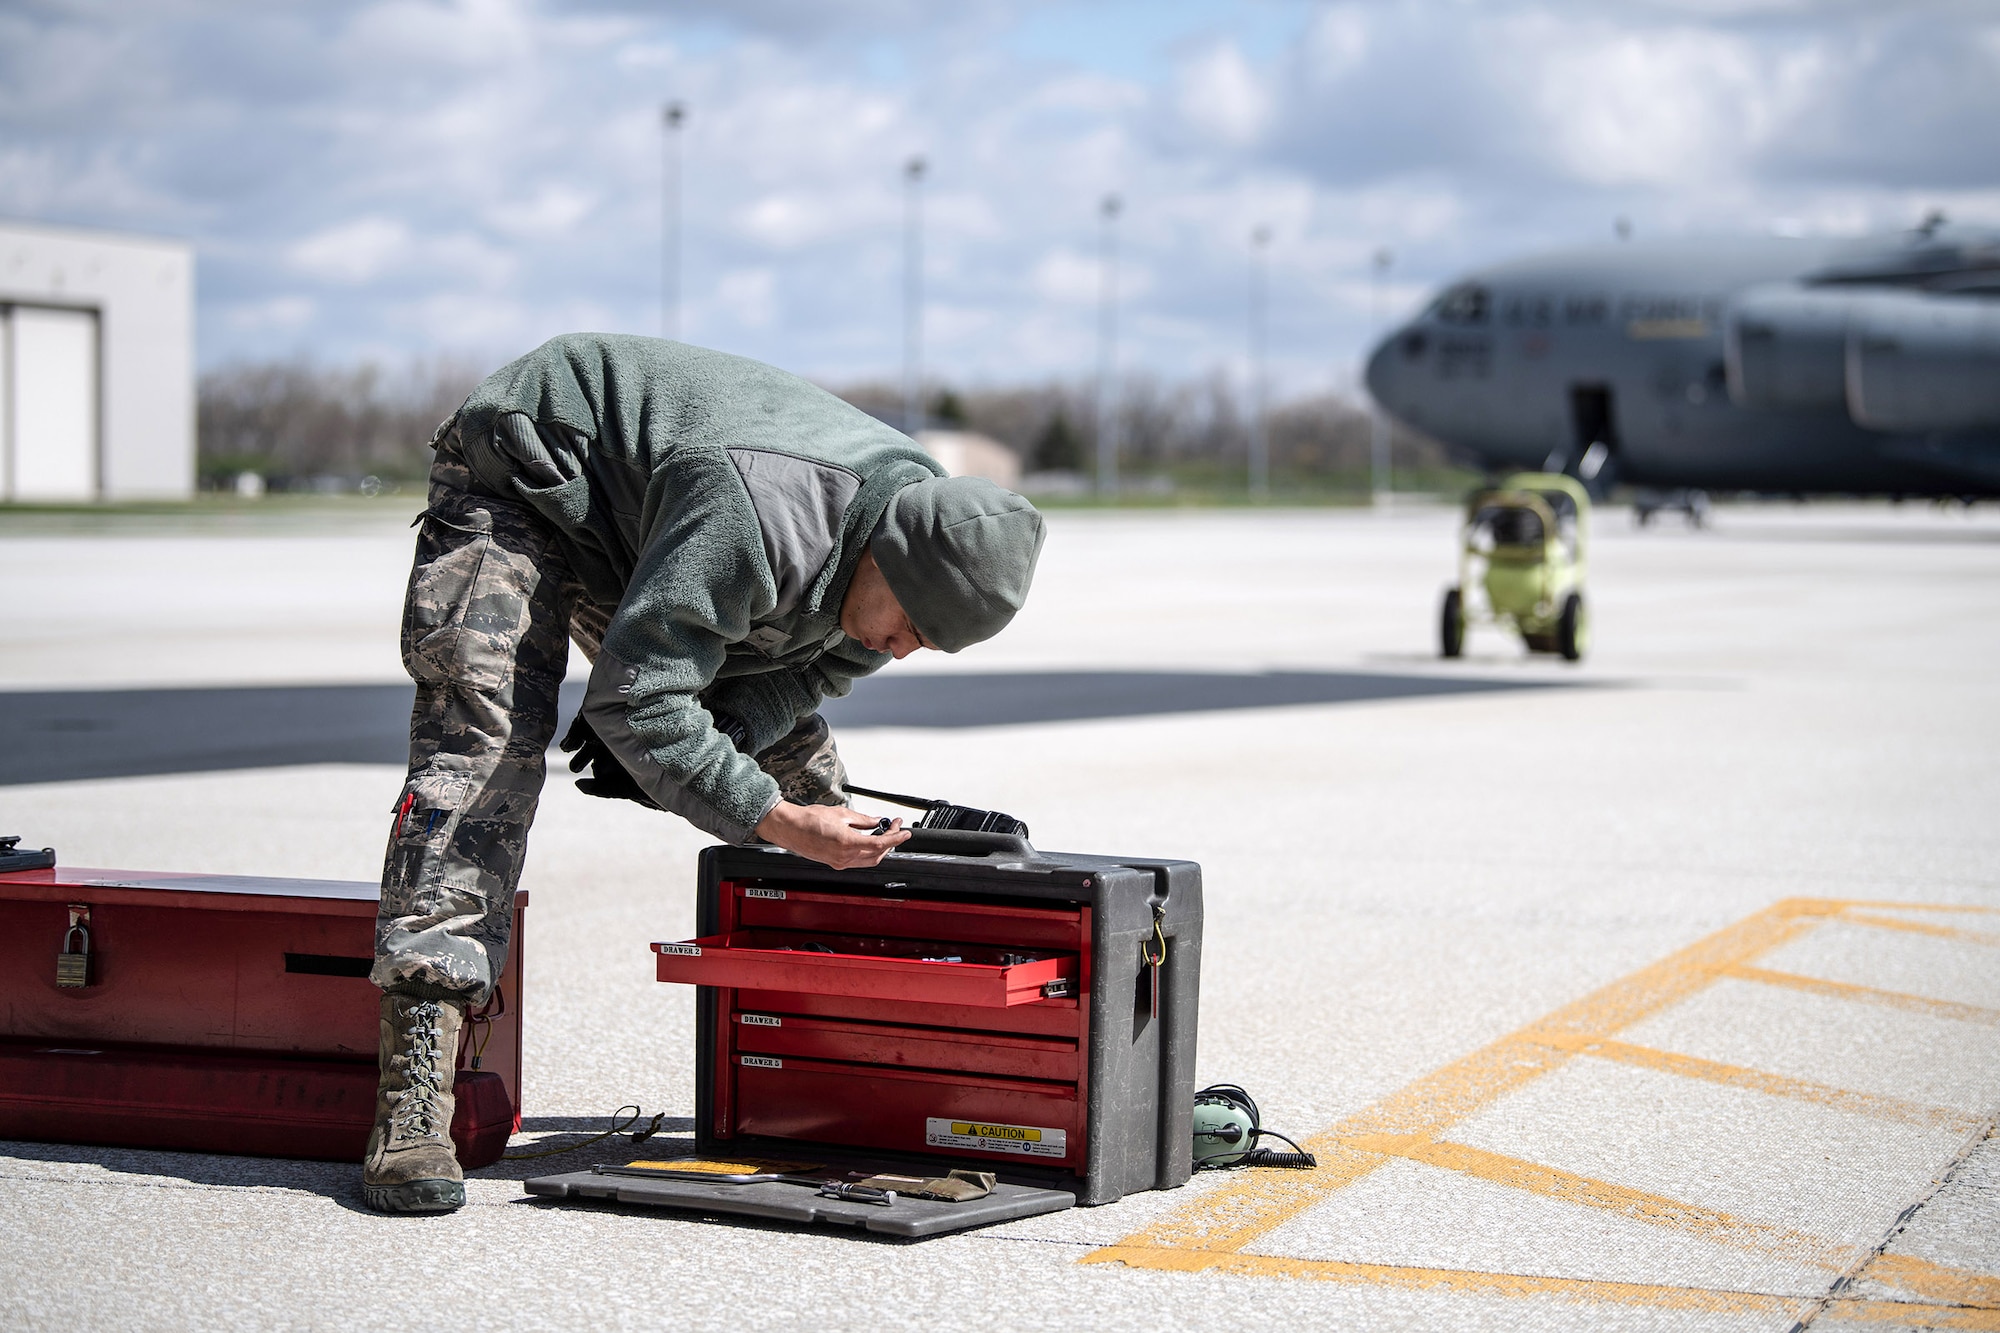 Airman 1st Class Luis Ramirez-Rosado, 445th Aircraft Maintenance Squadron, retrieves tools from his toolbox prior to changing tires on a  C-17 Globemaster III here April 9, 2020. (U.S. Air Force photo/Mr. Patrick O’Reilly)